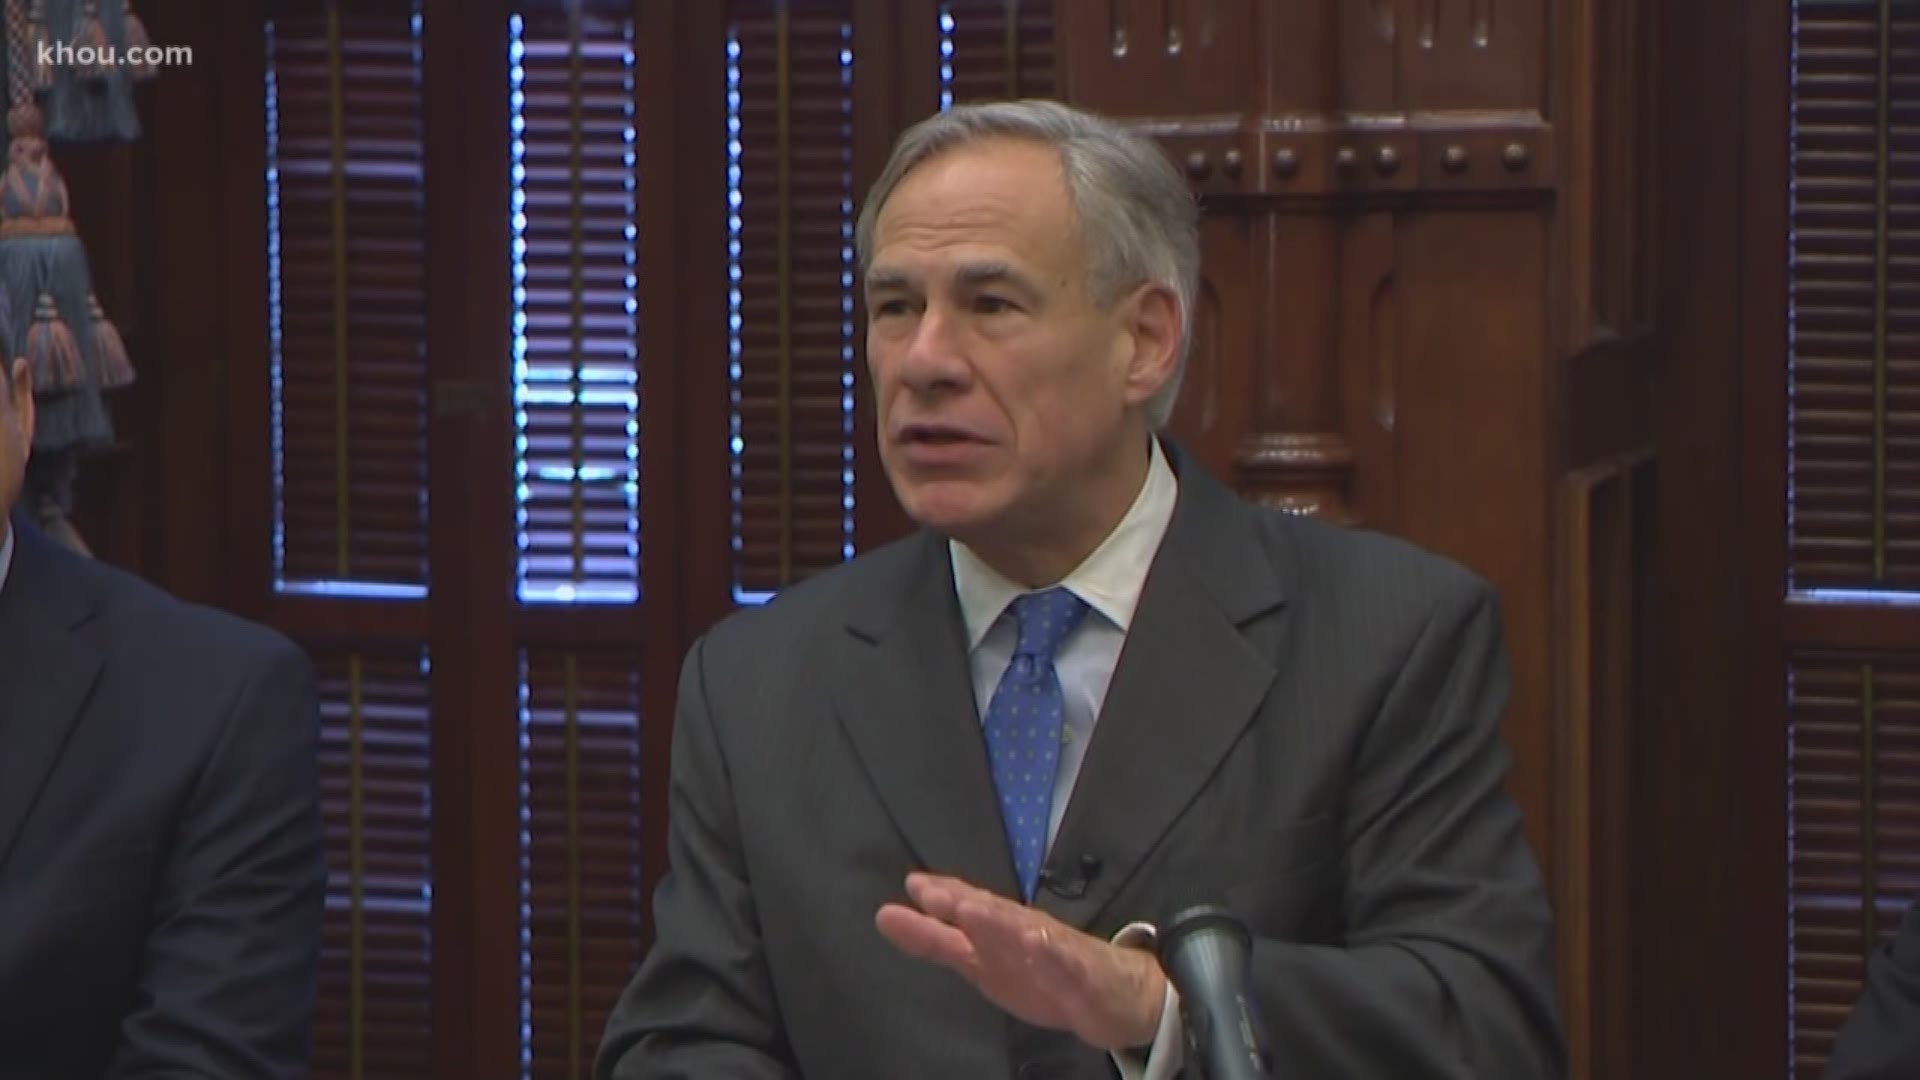 Gov. Greg Abbott has signed three bills that aim to improve school safety, increase security efforts and provide better mental health resources to Texas students.